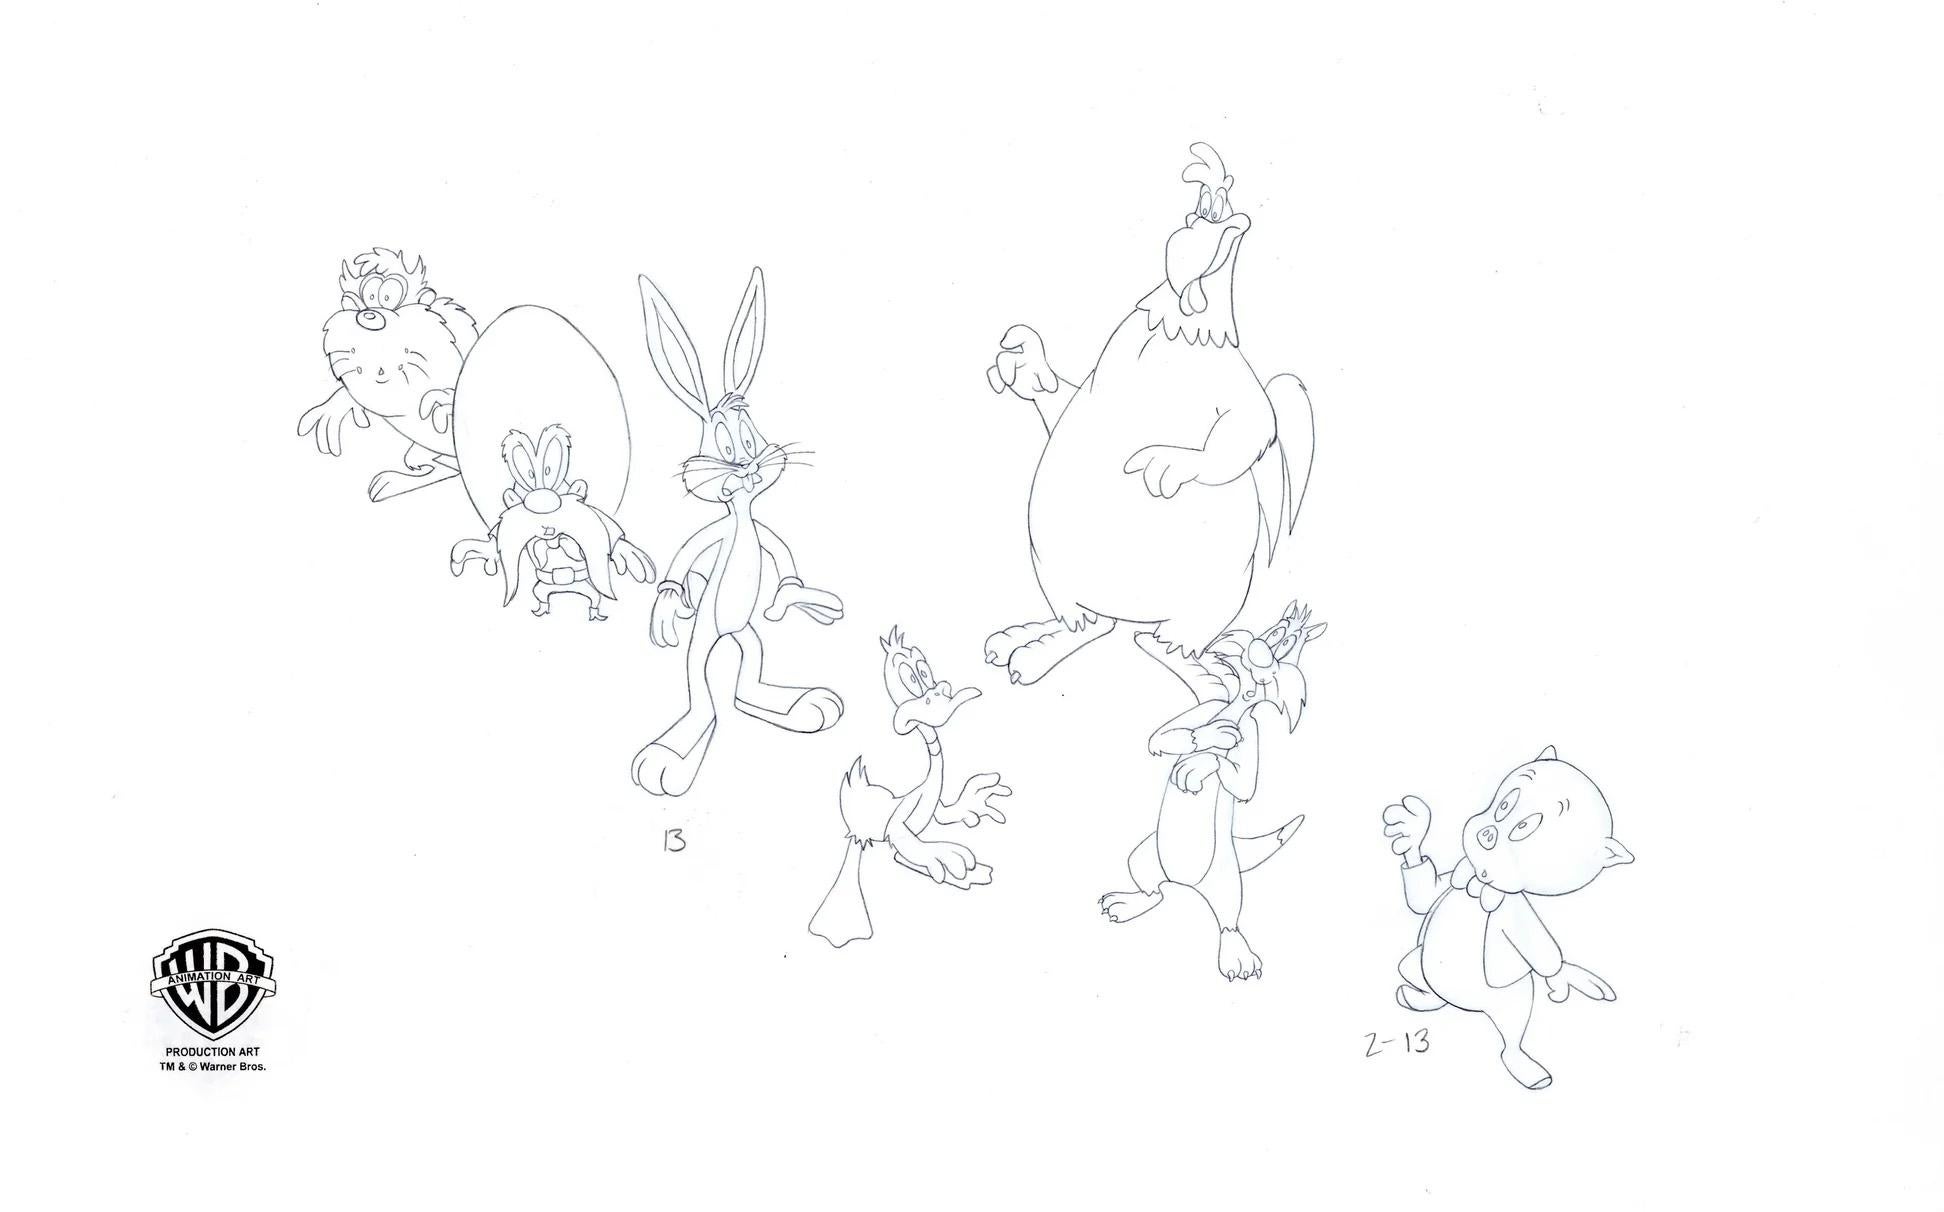 Looney Tunes Original Production Double Sided Drawing: Looney Tunes Cast - Pop Art Art by Looney Tunes Studio Artists